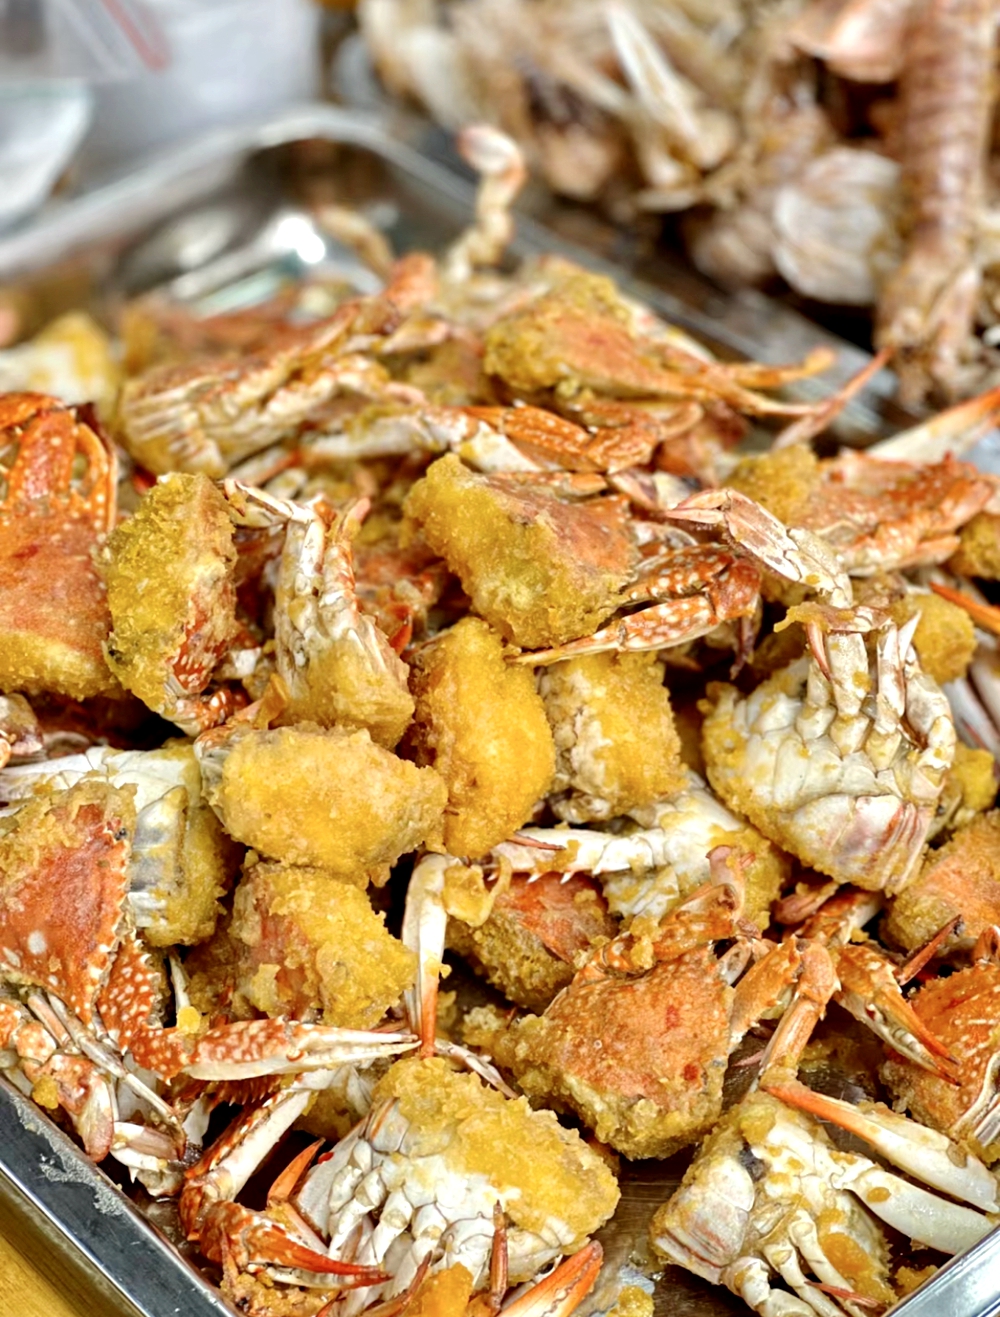 Fried crabs are seen in Haikou, south China's Hainan Province. /Photo provided to CGTN